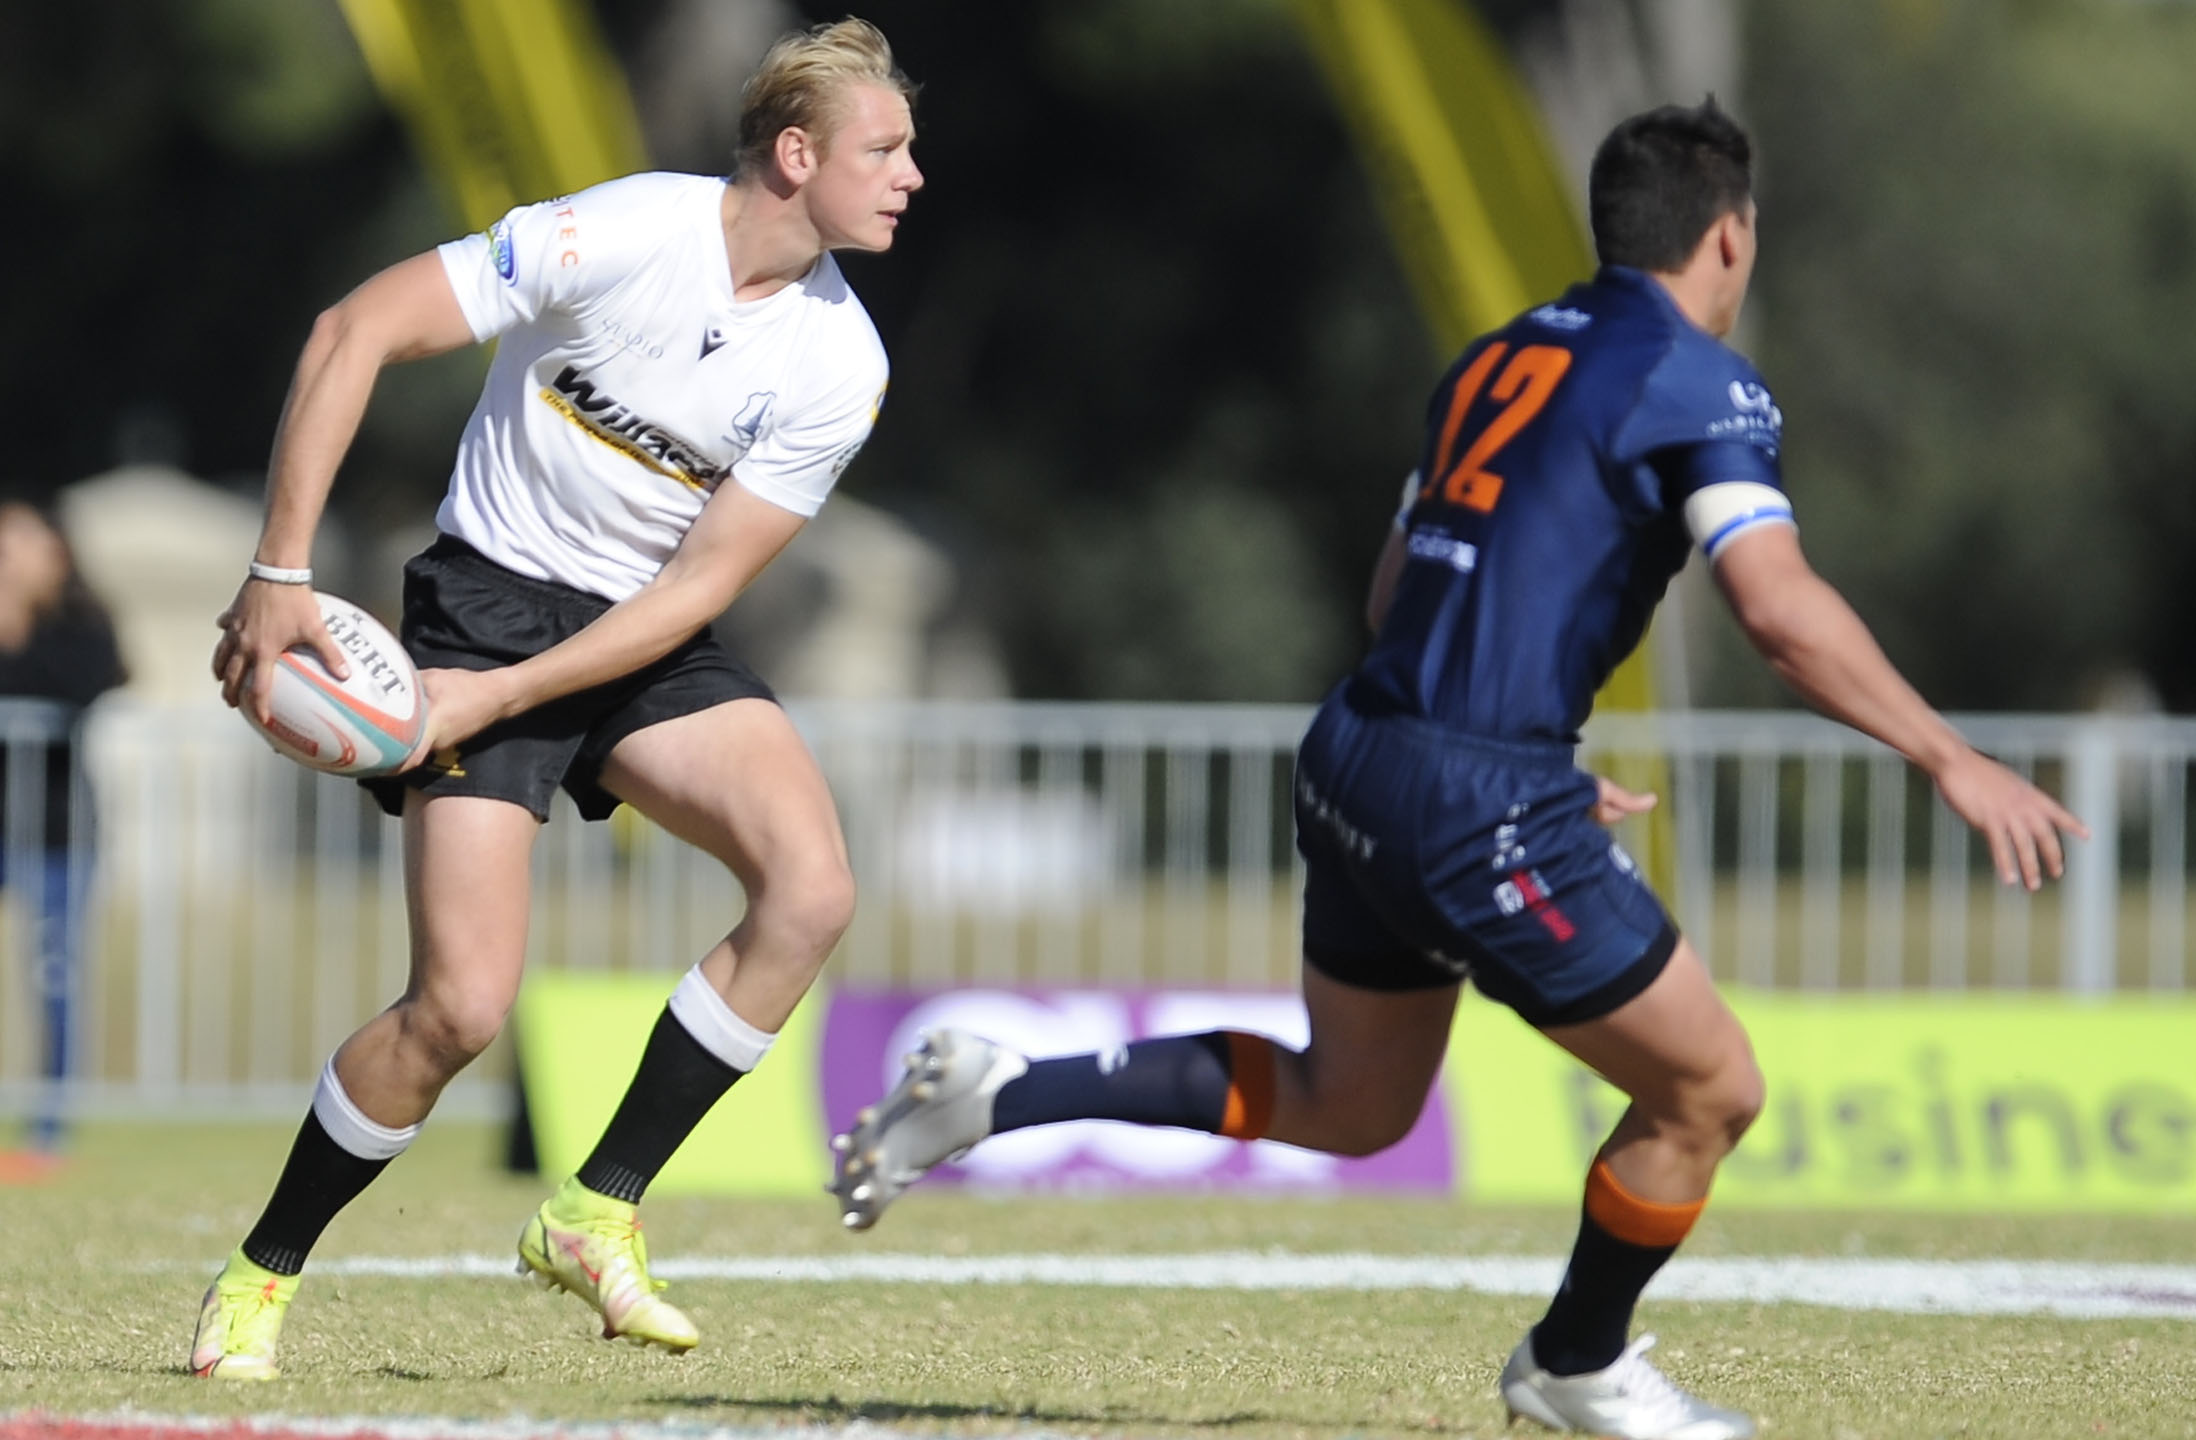 Conrad Sevenster of Hoërskool Monument passes the ball to an unseen player